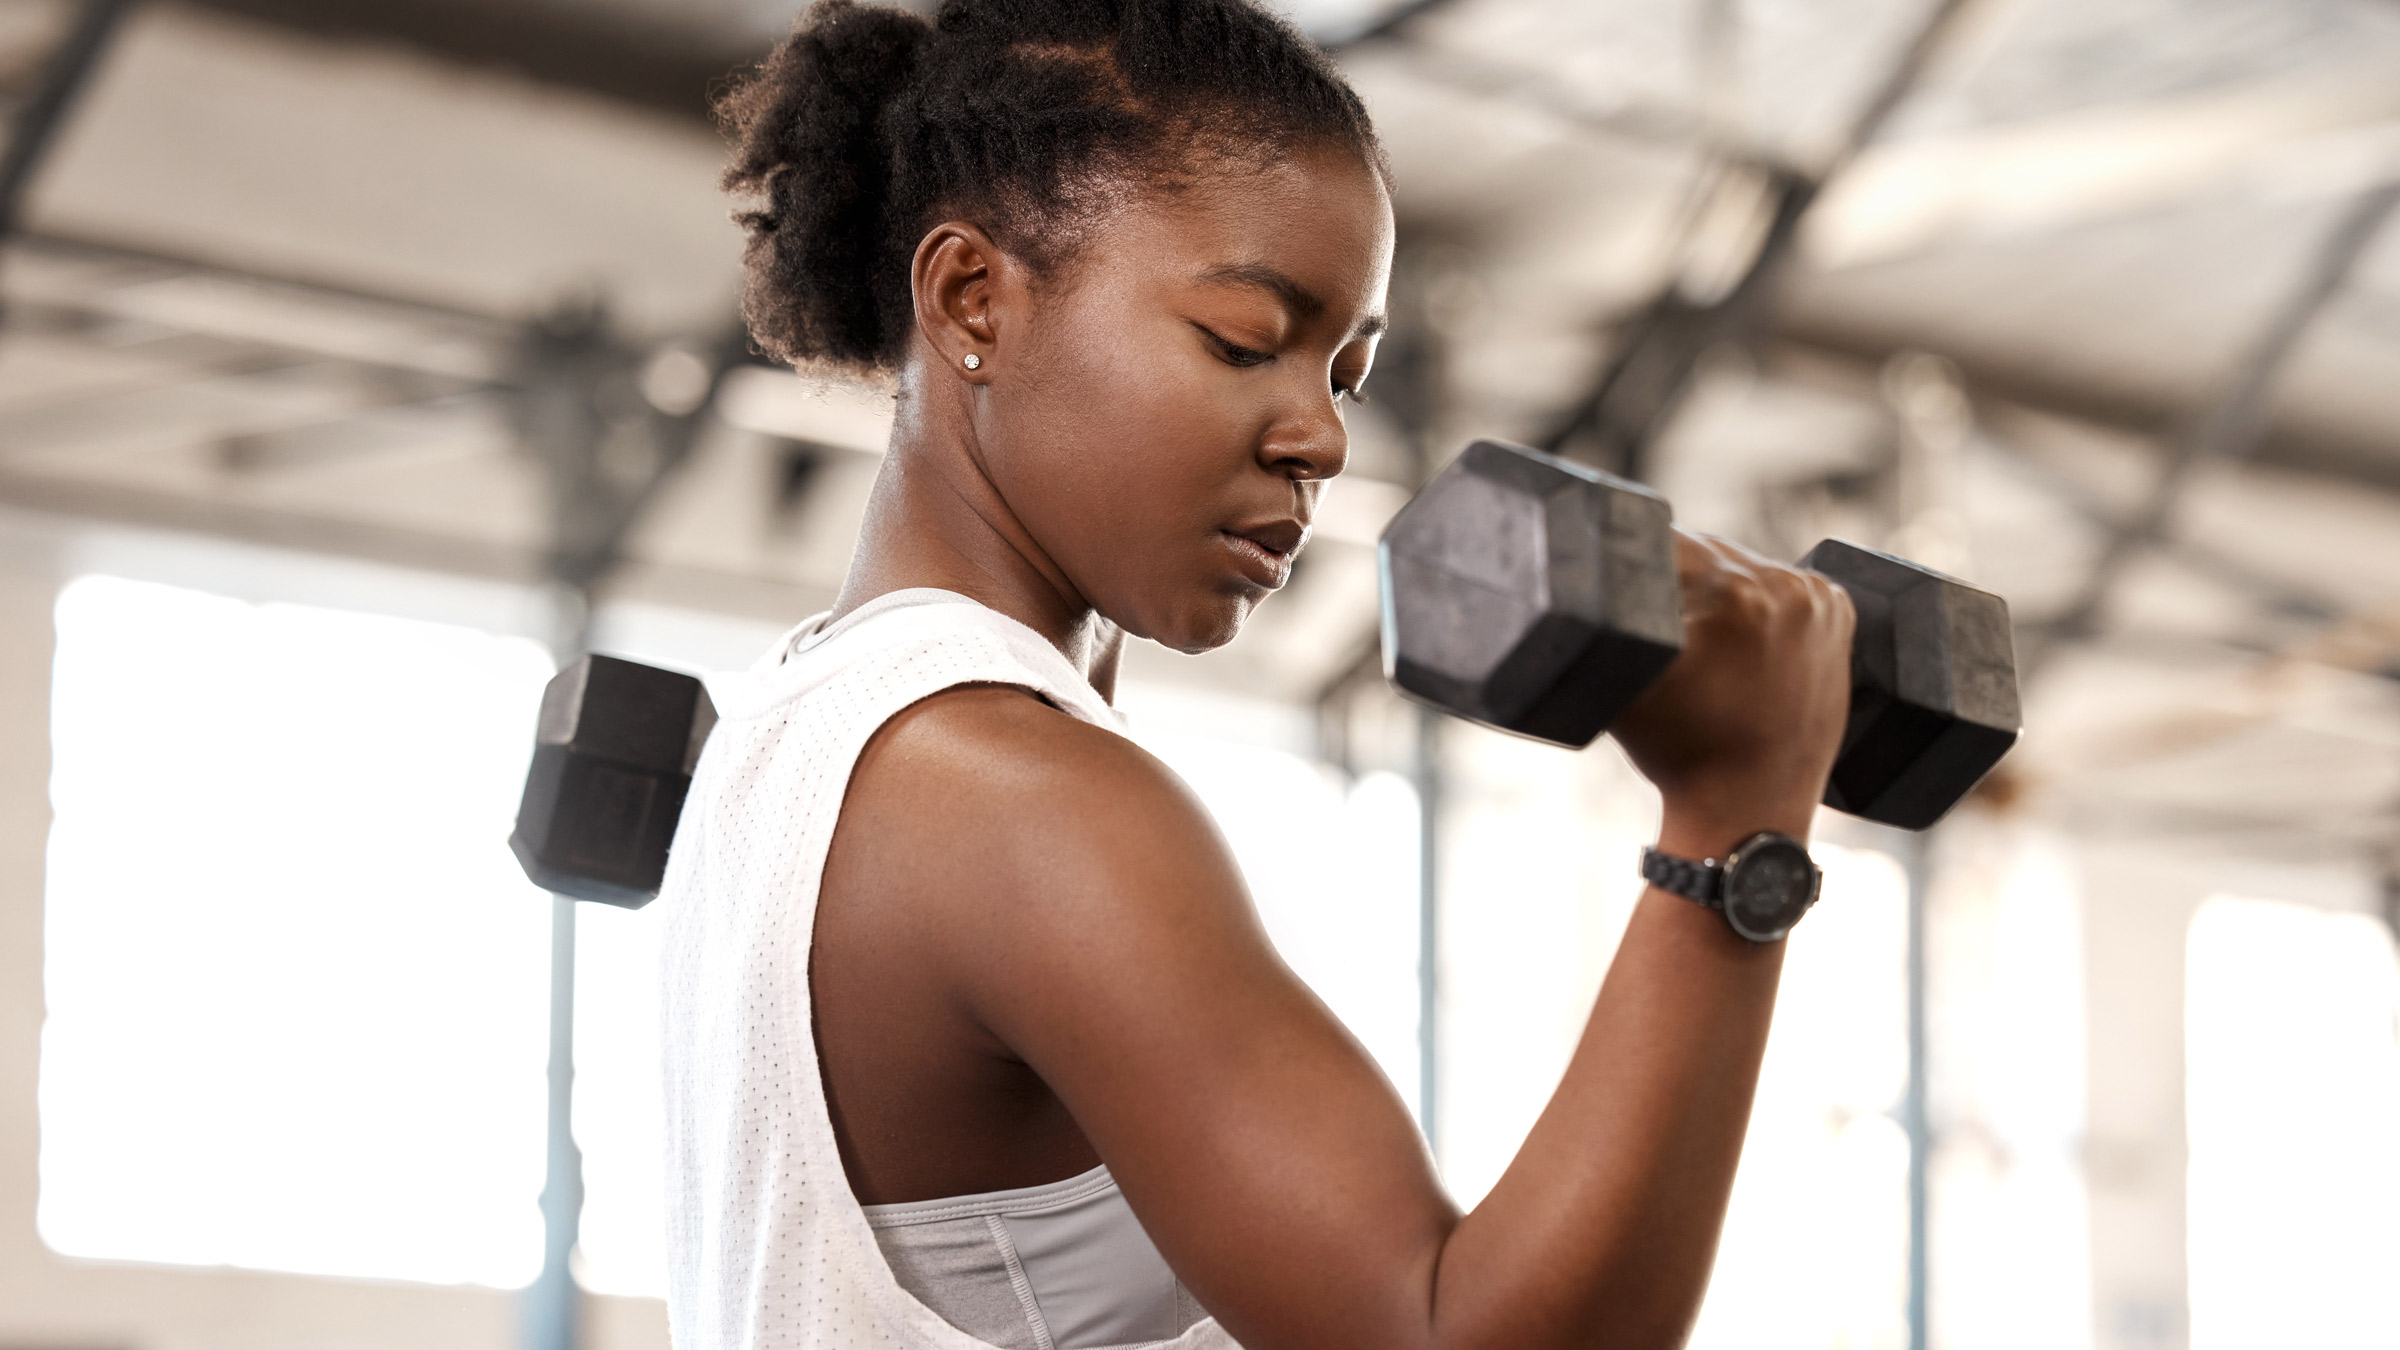 How Long Does It Take to Get in Shape? Fitness Tips From Experts - GoodRx